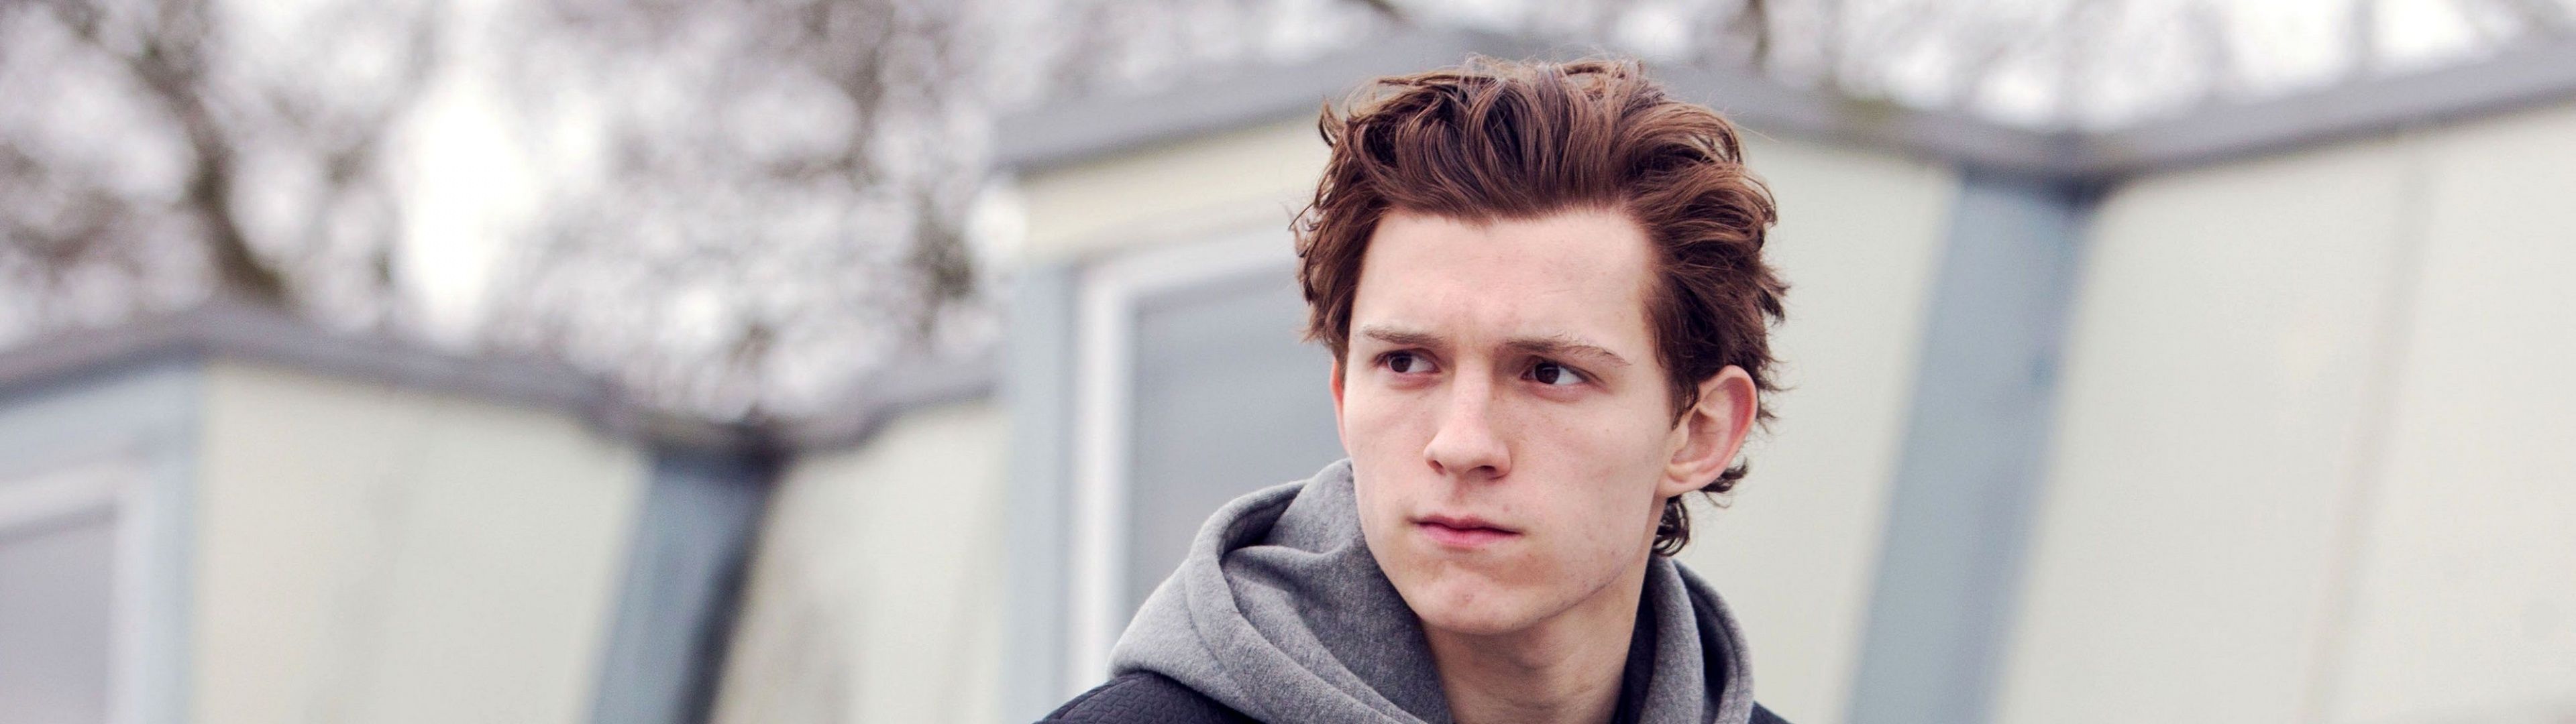 Tom Holland, the actor who plays Spiderman, looks into the camera. - Tom Holland